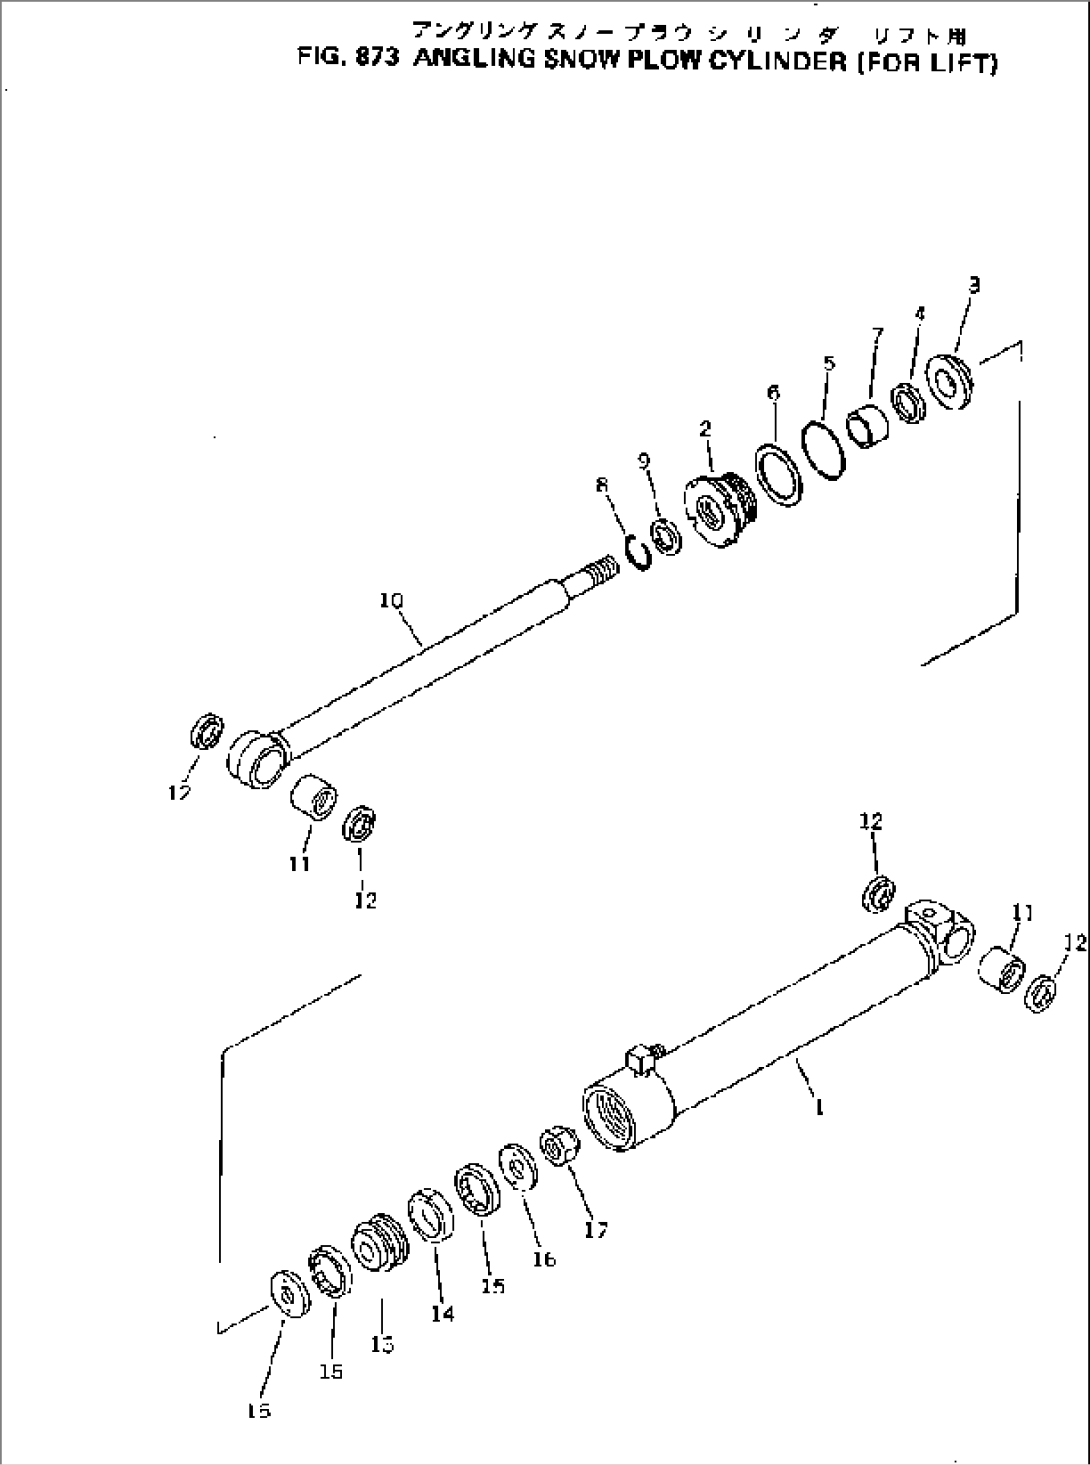 ANGLING SNOW PLOW CYLINDER (FOR LIFT)